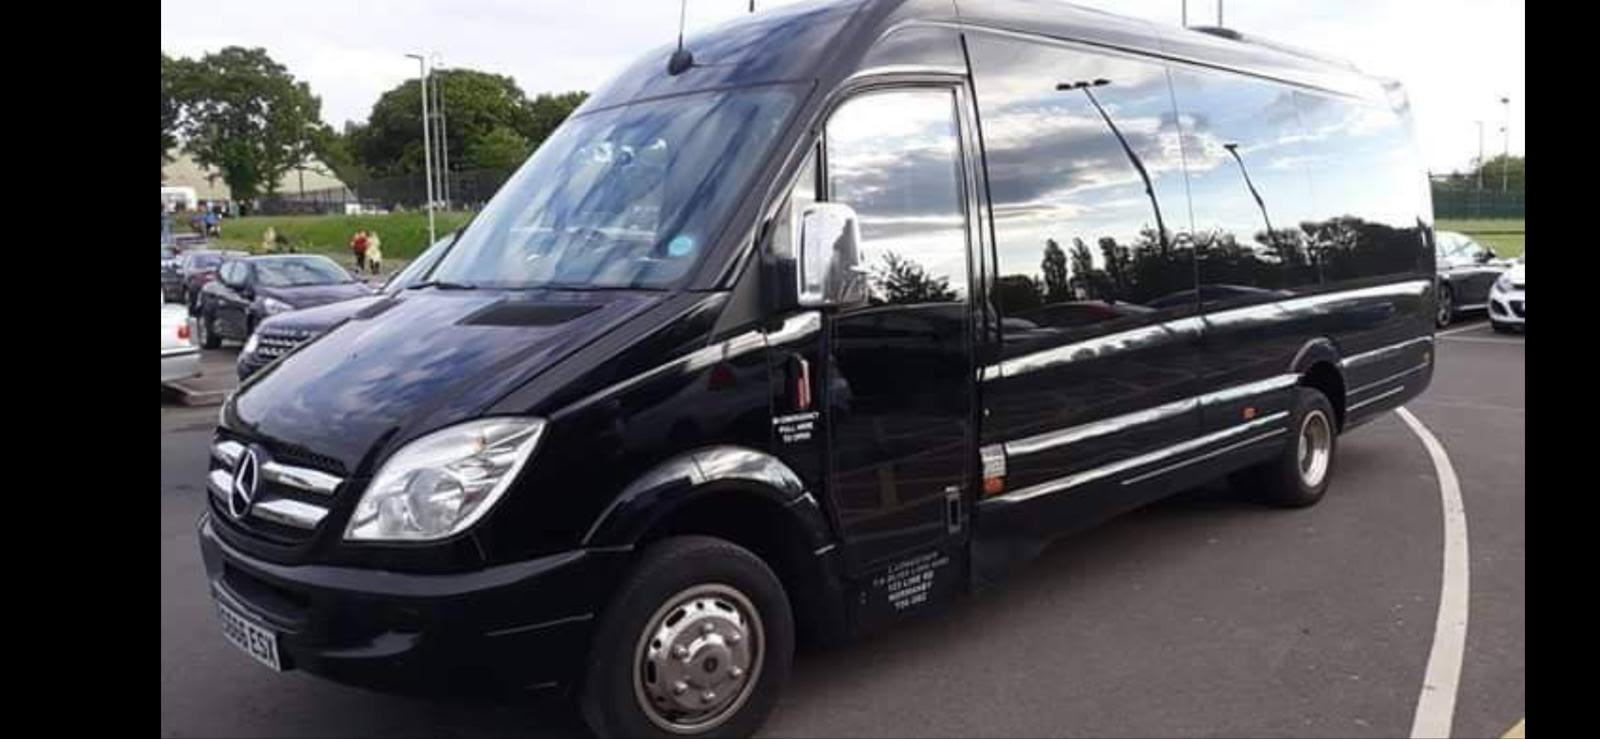 party bus hire in Yorkshire